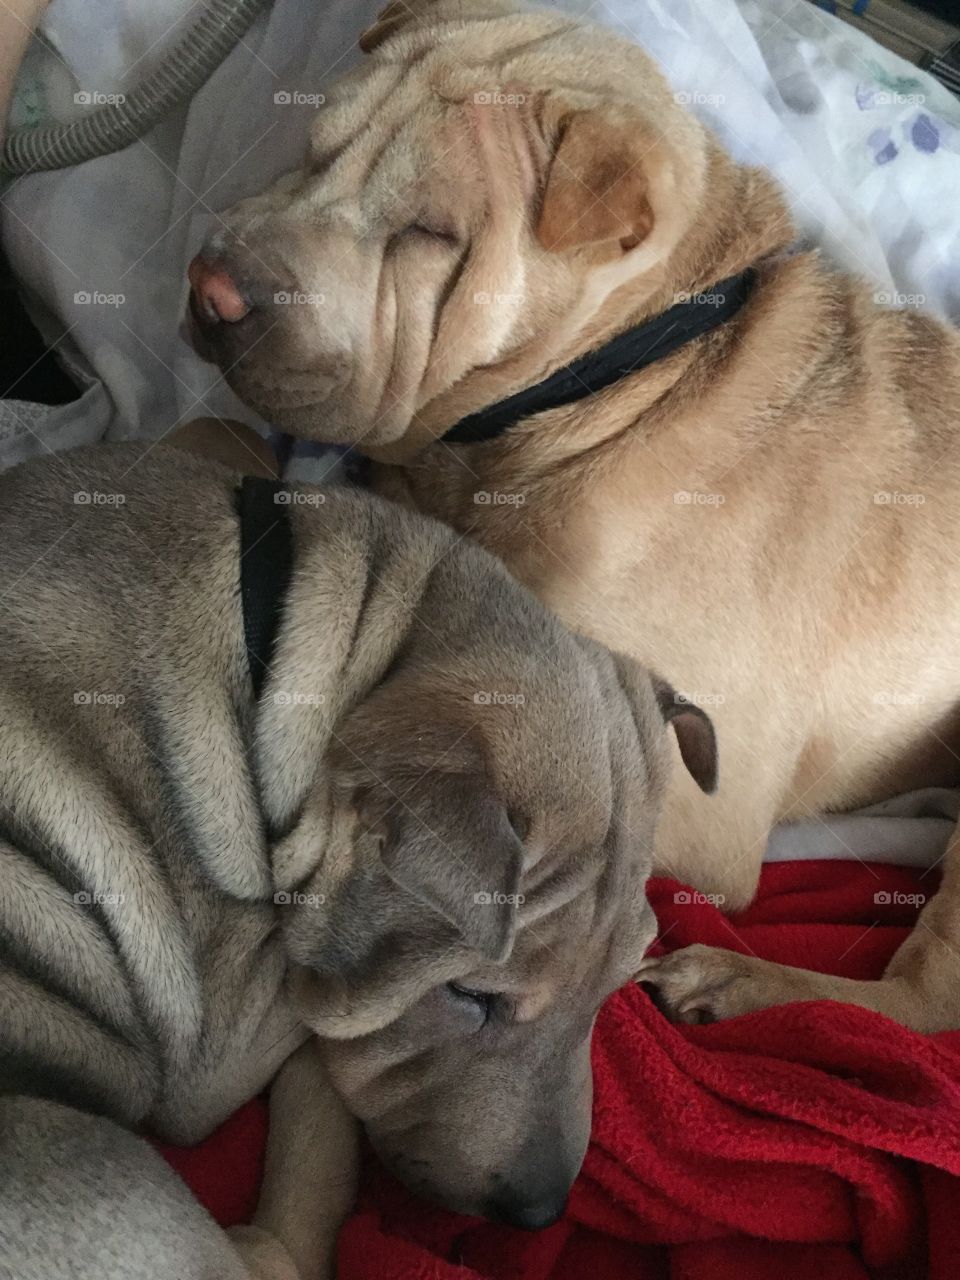 Rare croissant dogs curled up sleeping. Actually it's a cream adult shar-pei and tan/grey sharpei puppy.